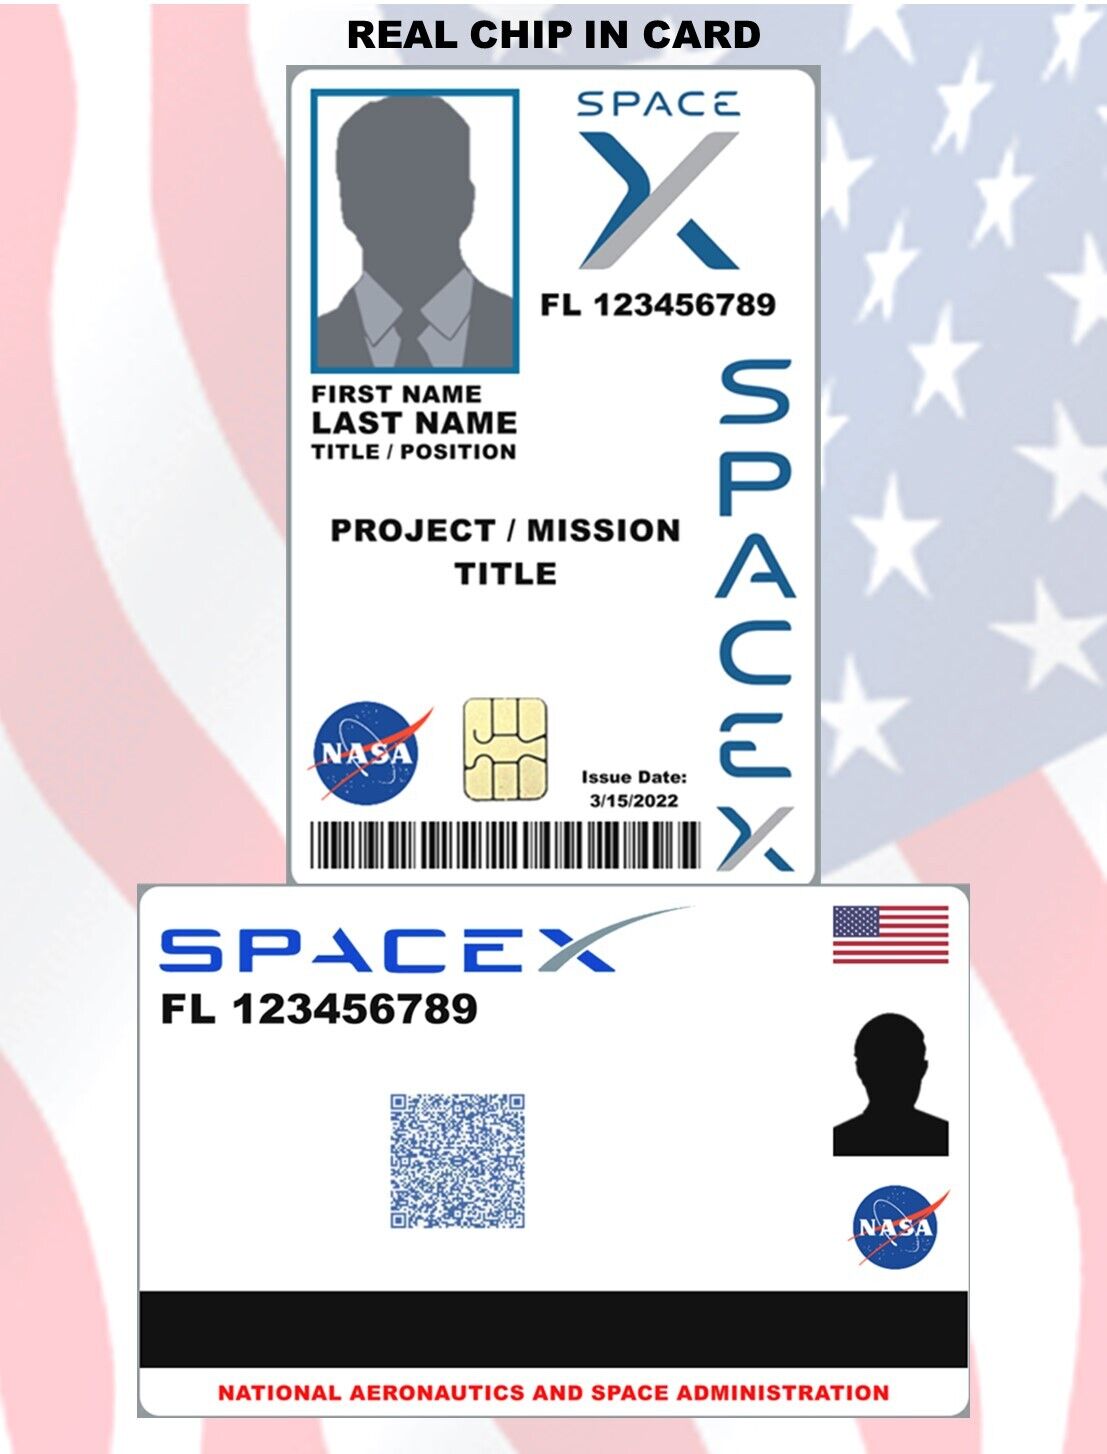 SPACE IDs   area 51, NASA, space x